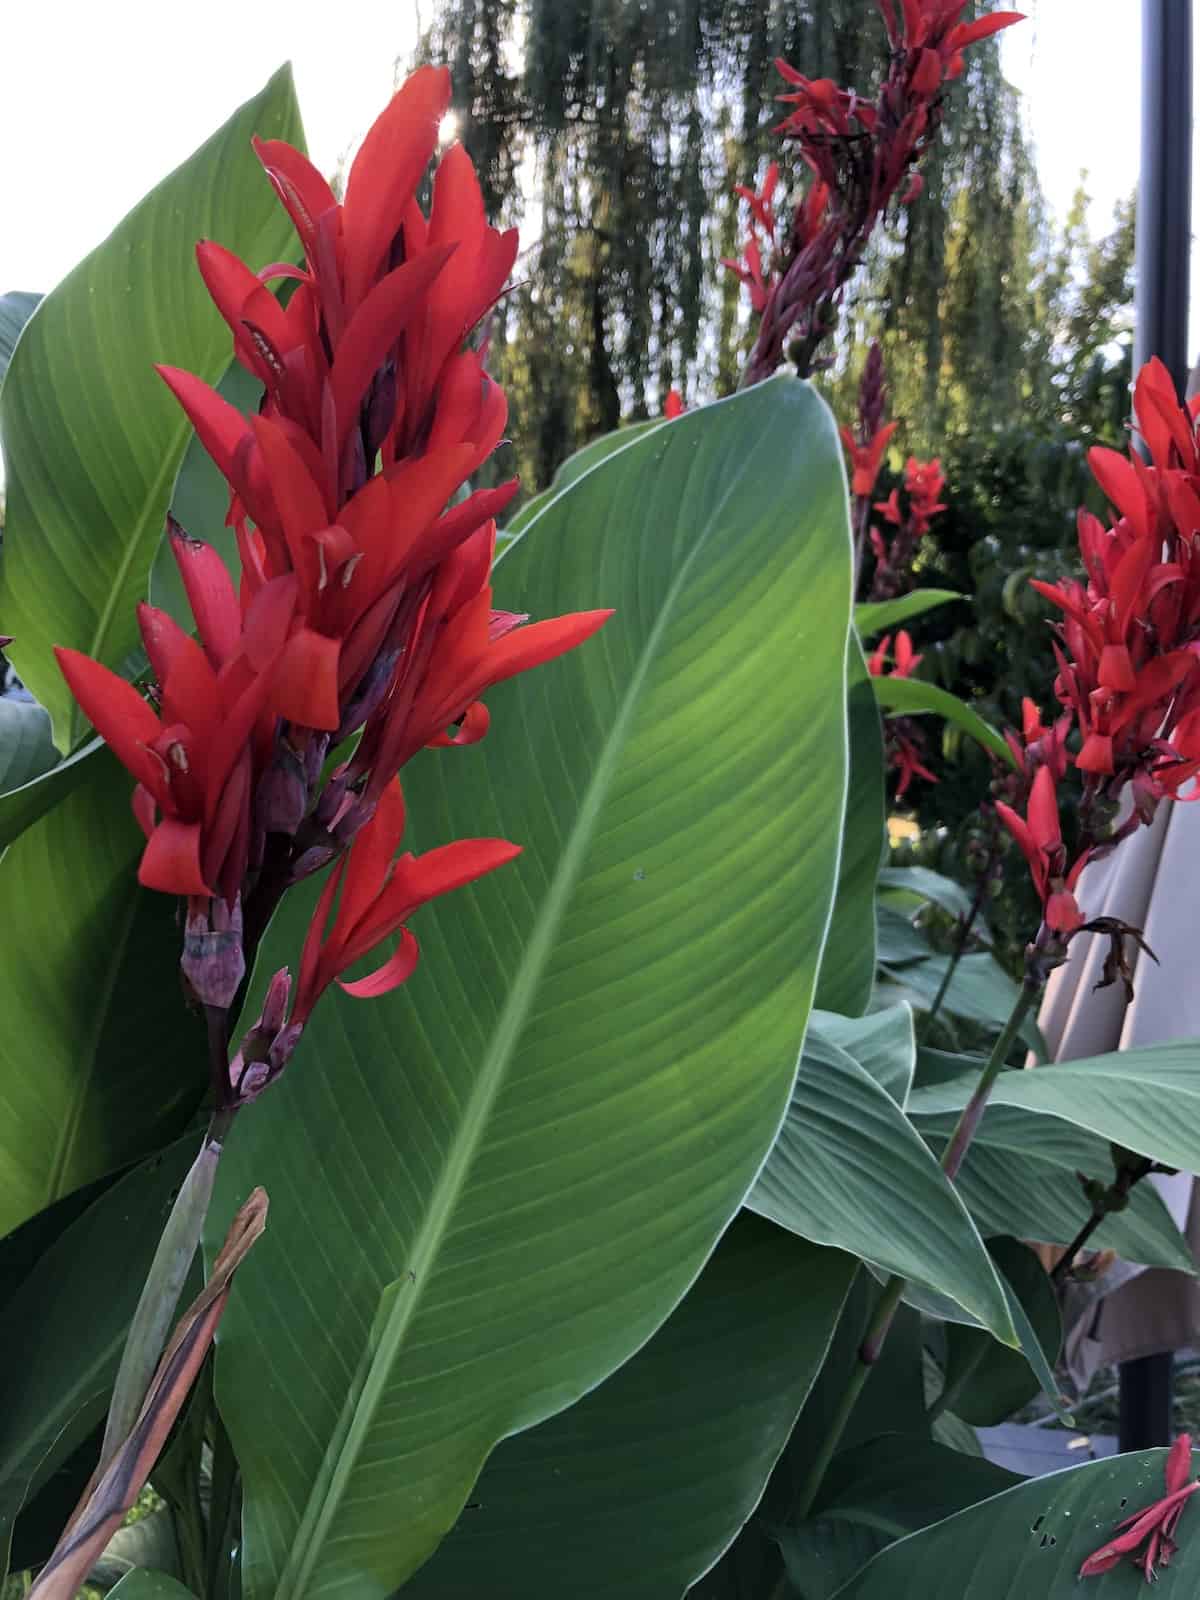 My canna lilies are attracting hummingbirds this year